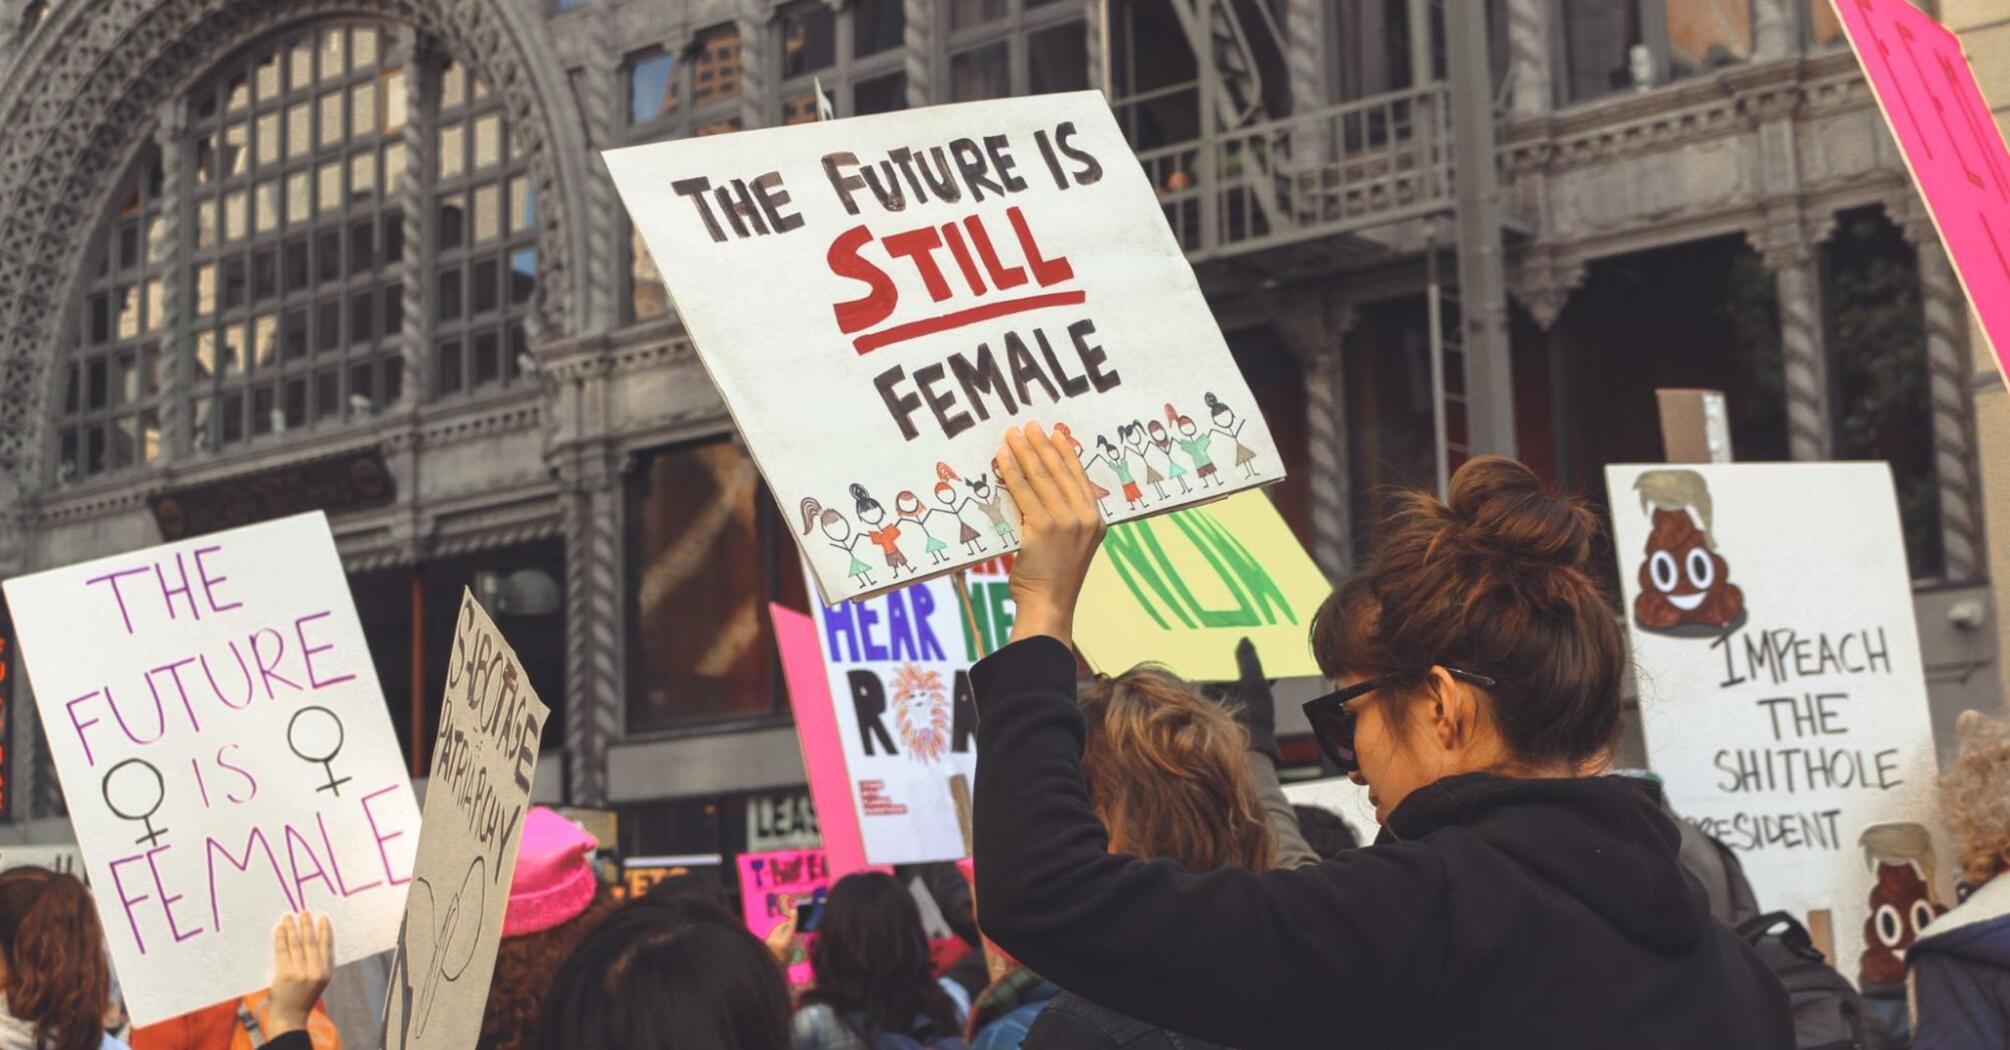 Feminist women's march with posters